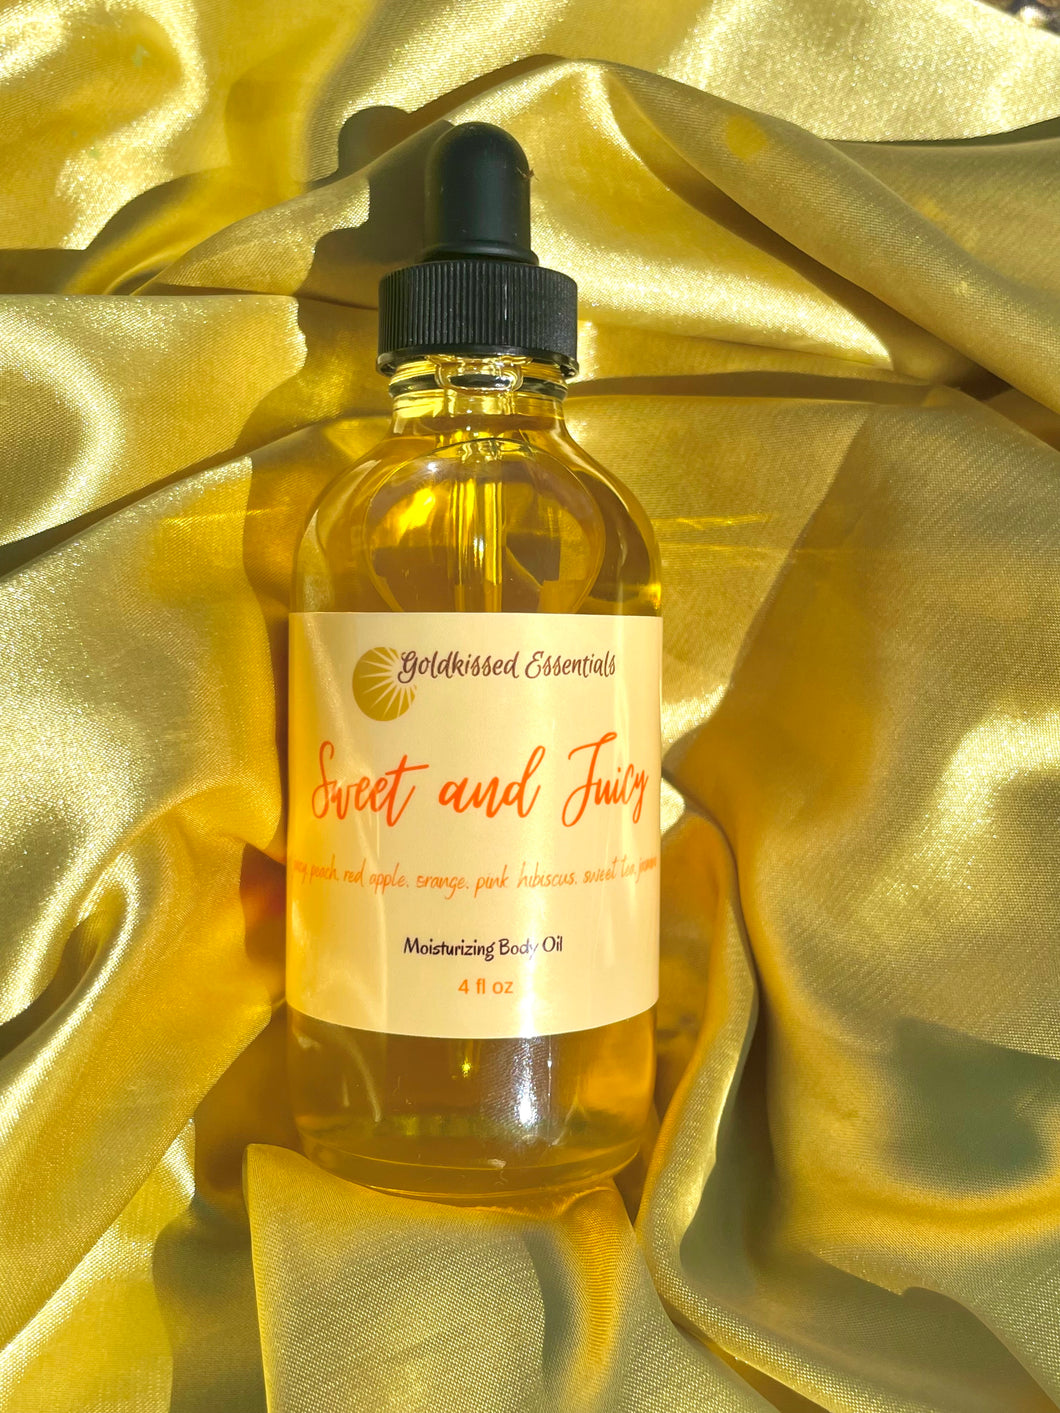 Sweet and Juicy Body Oil